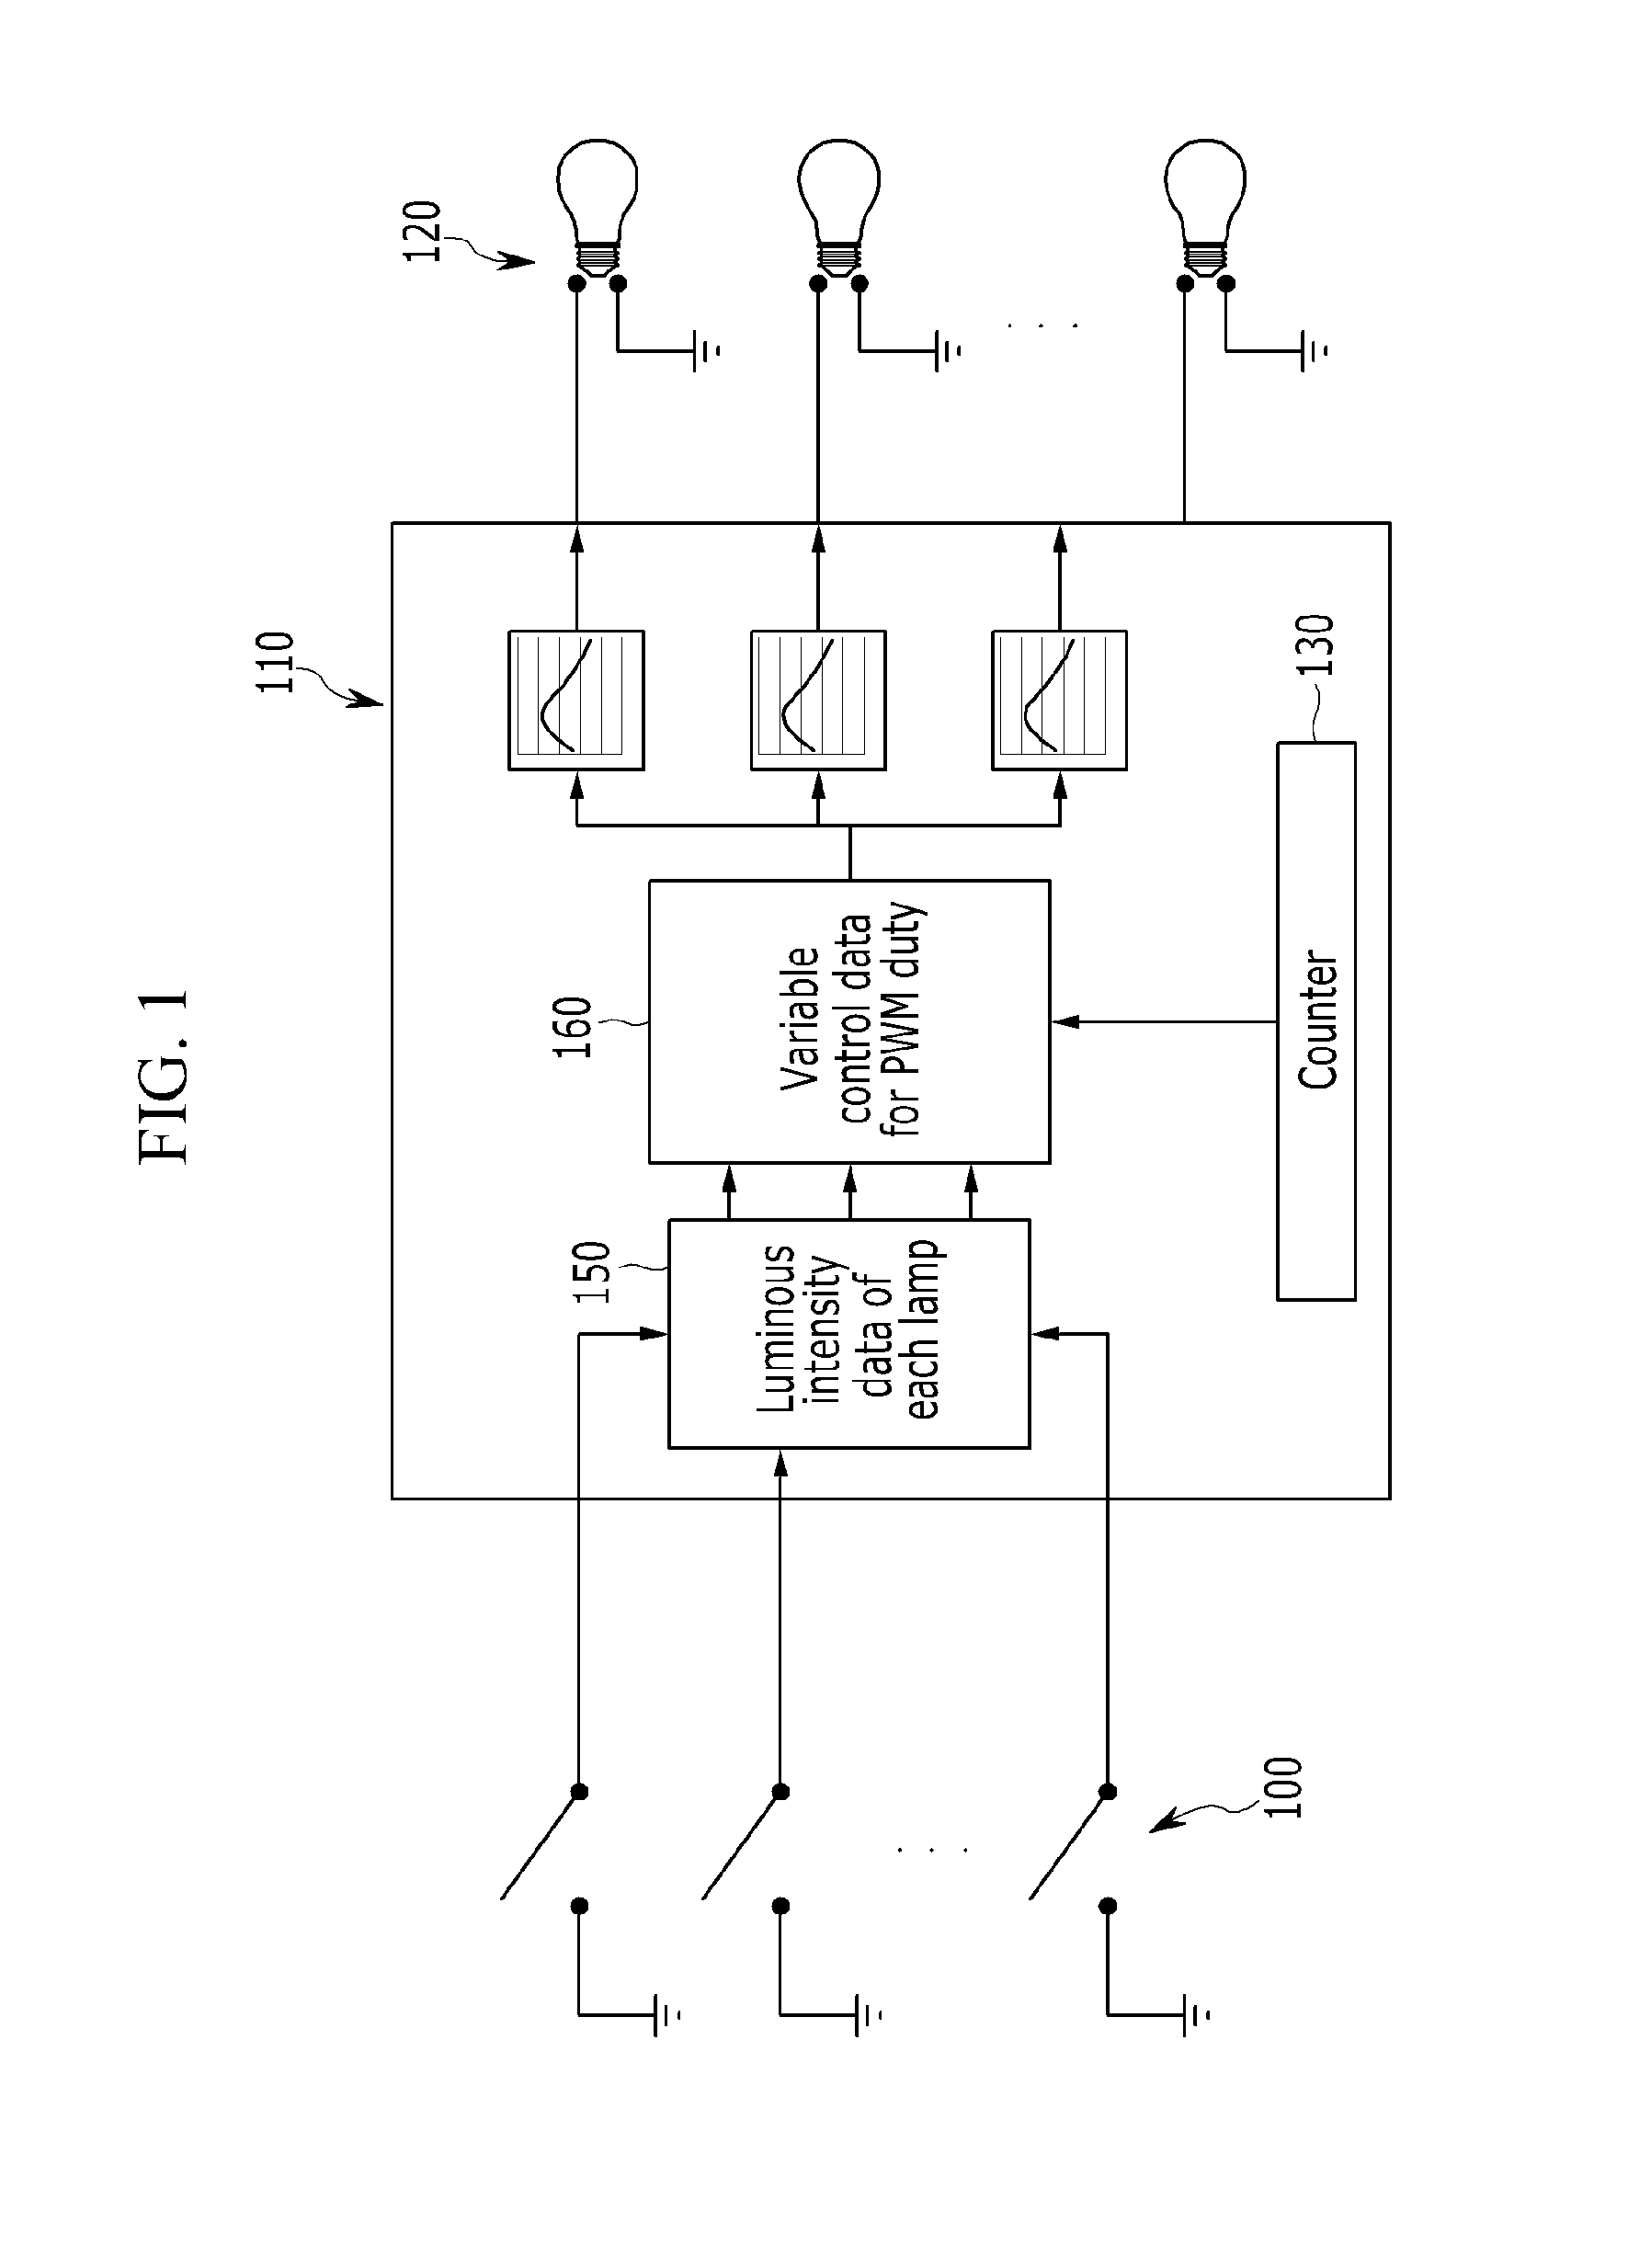 Power control method and system of lamp